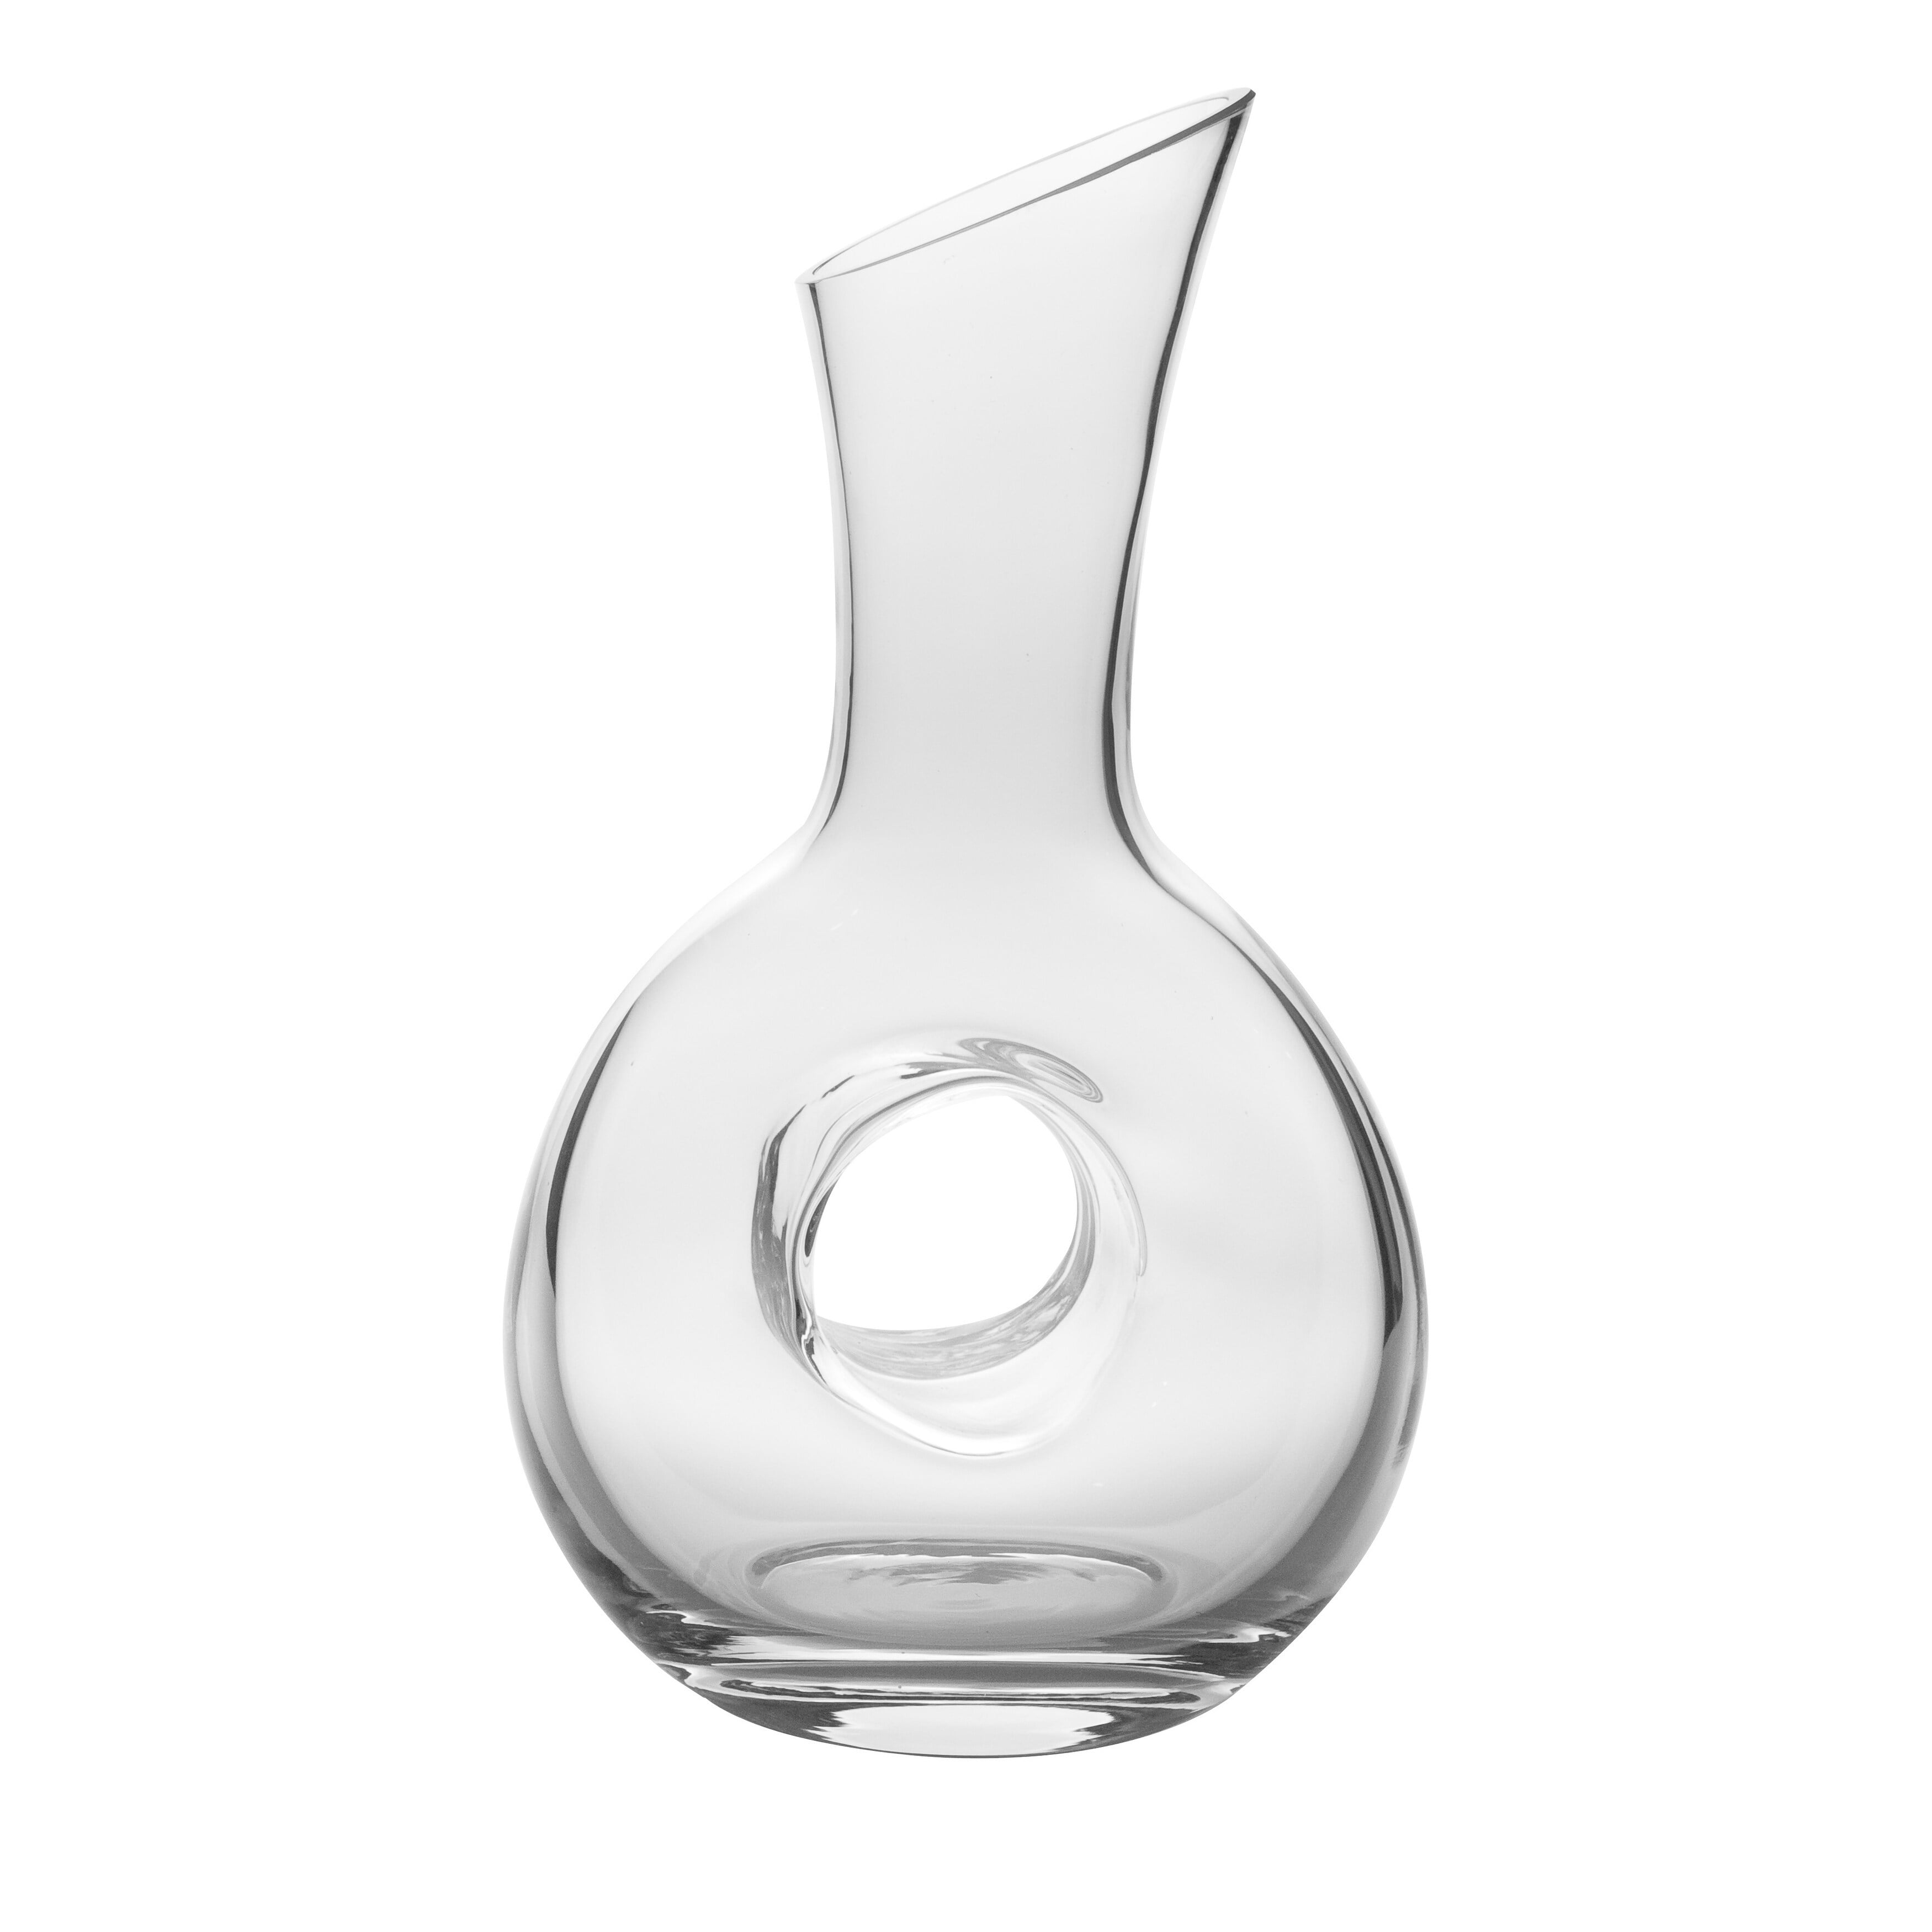 Majestic Gifts AT-104 European Individual Water Carafe Set with Glass, 28 oz